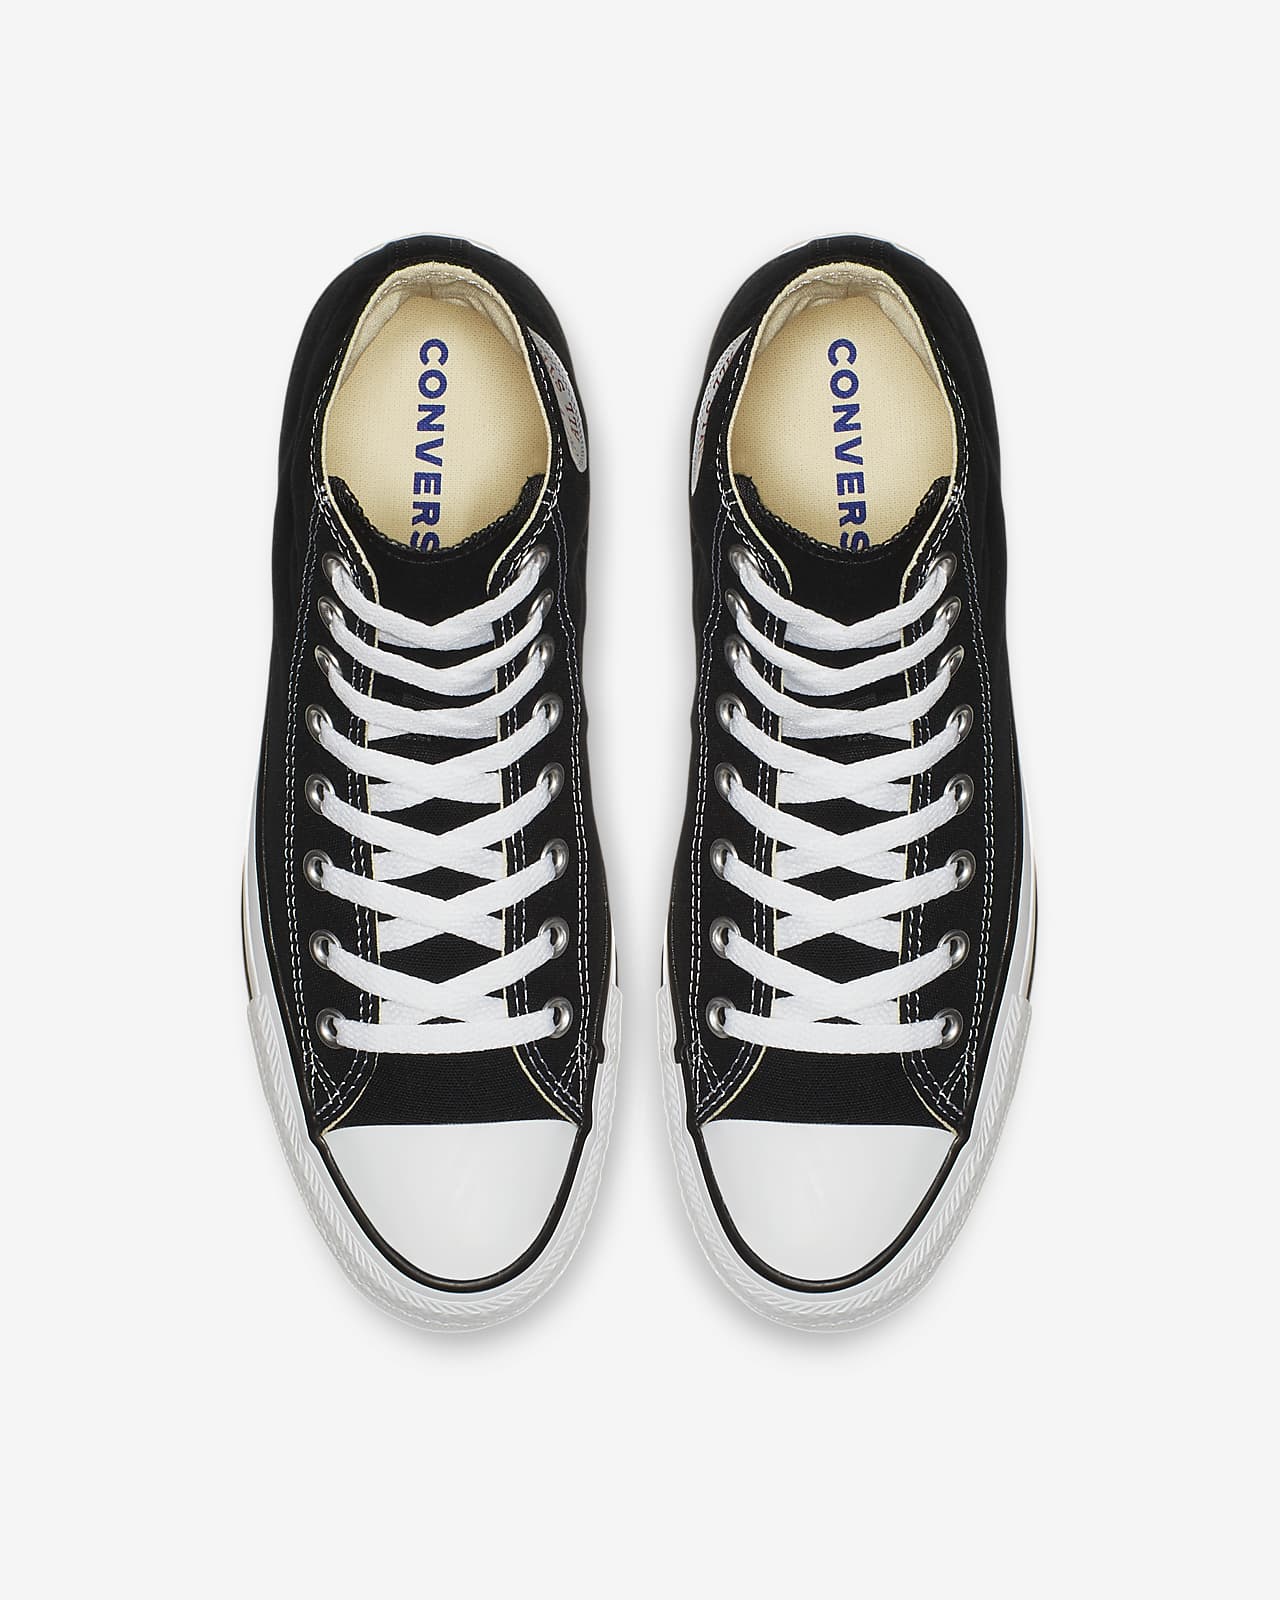 converse for high arches